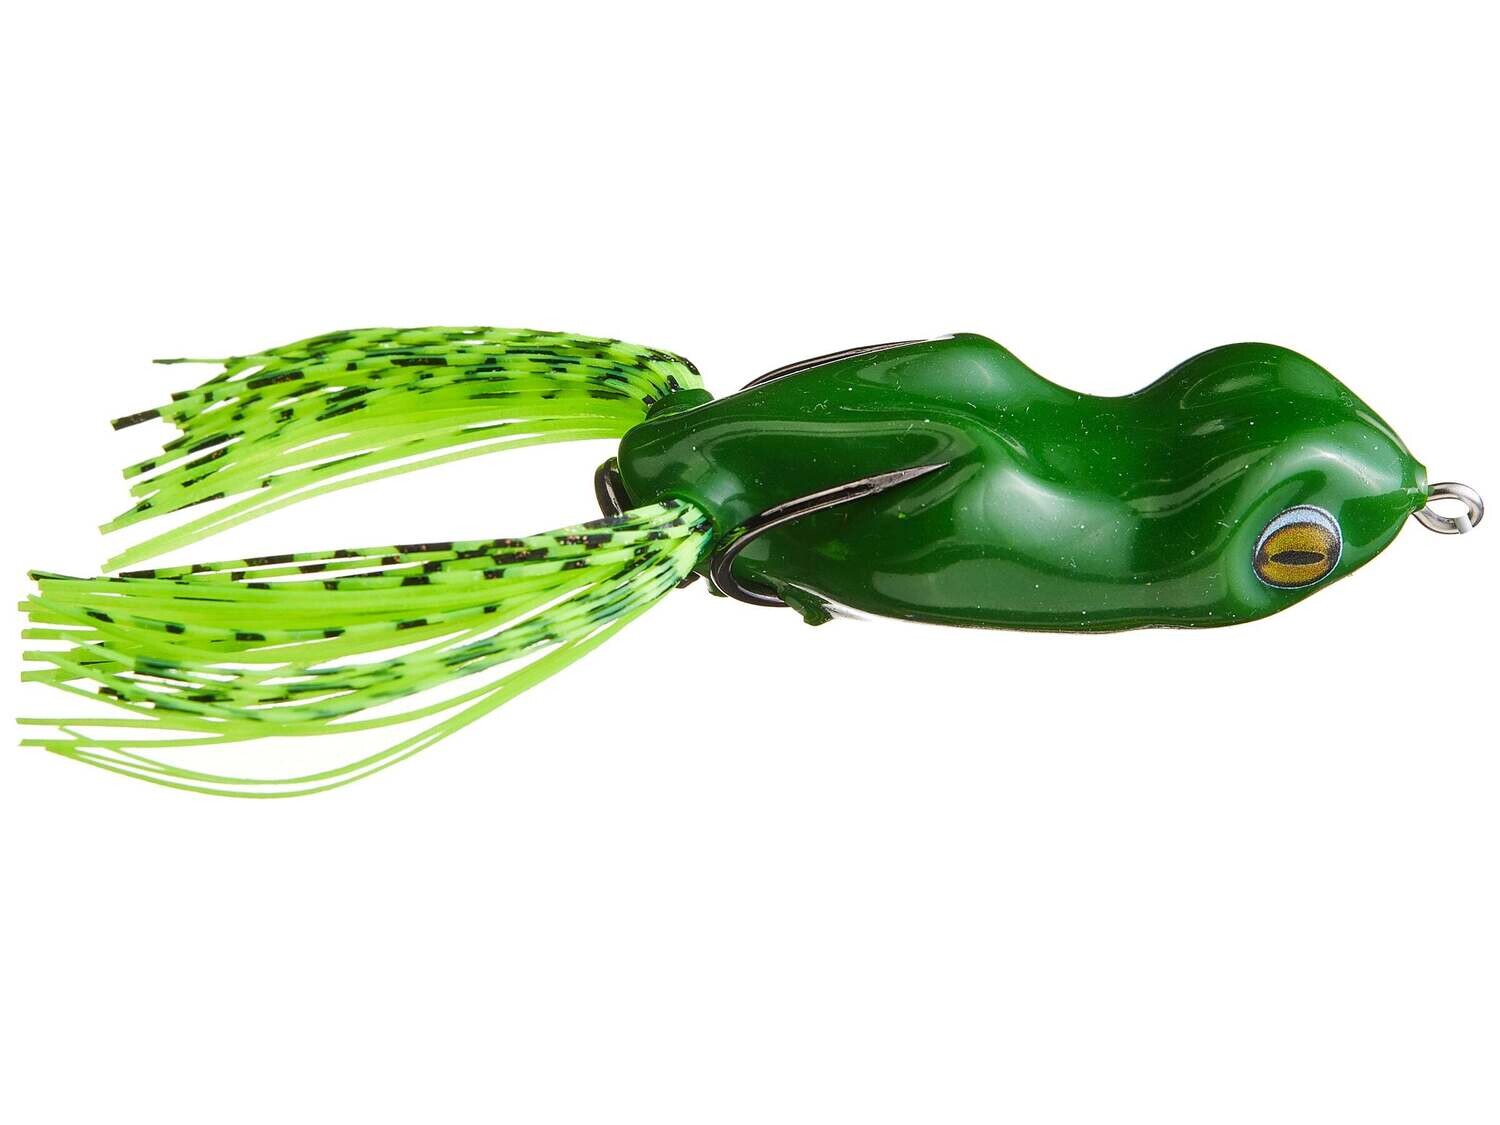 Scum Frog TS-1101 Trophy Series Topwater Frog, 2 3/4", 5/8 oz, Green, Floating